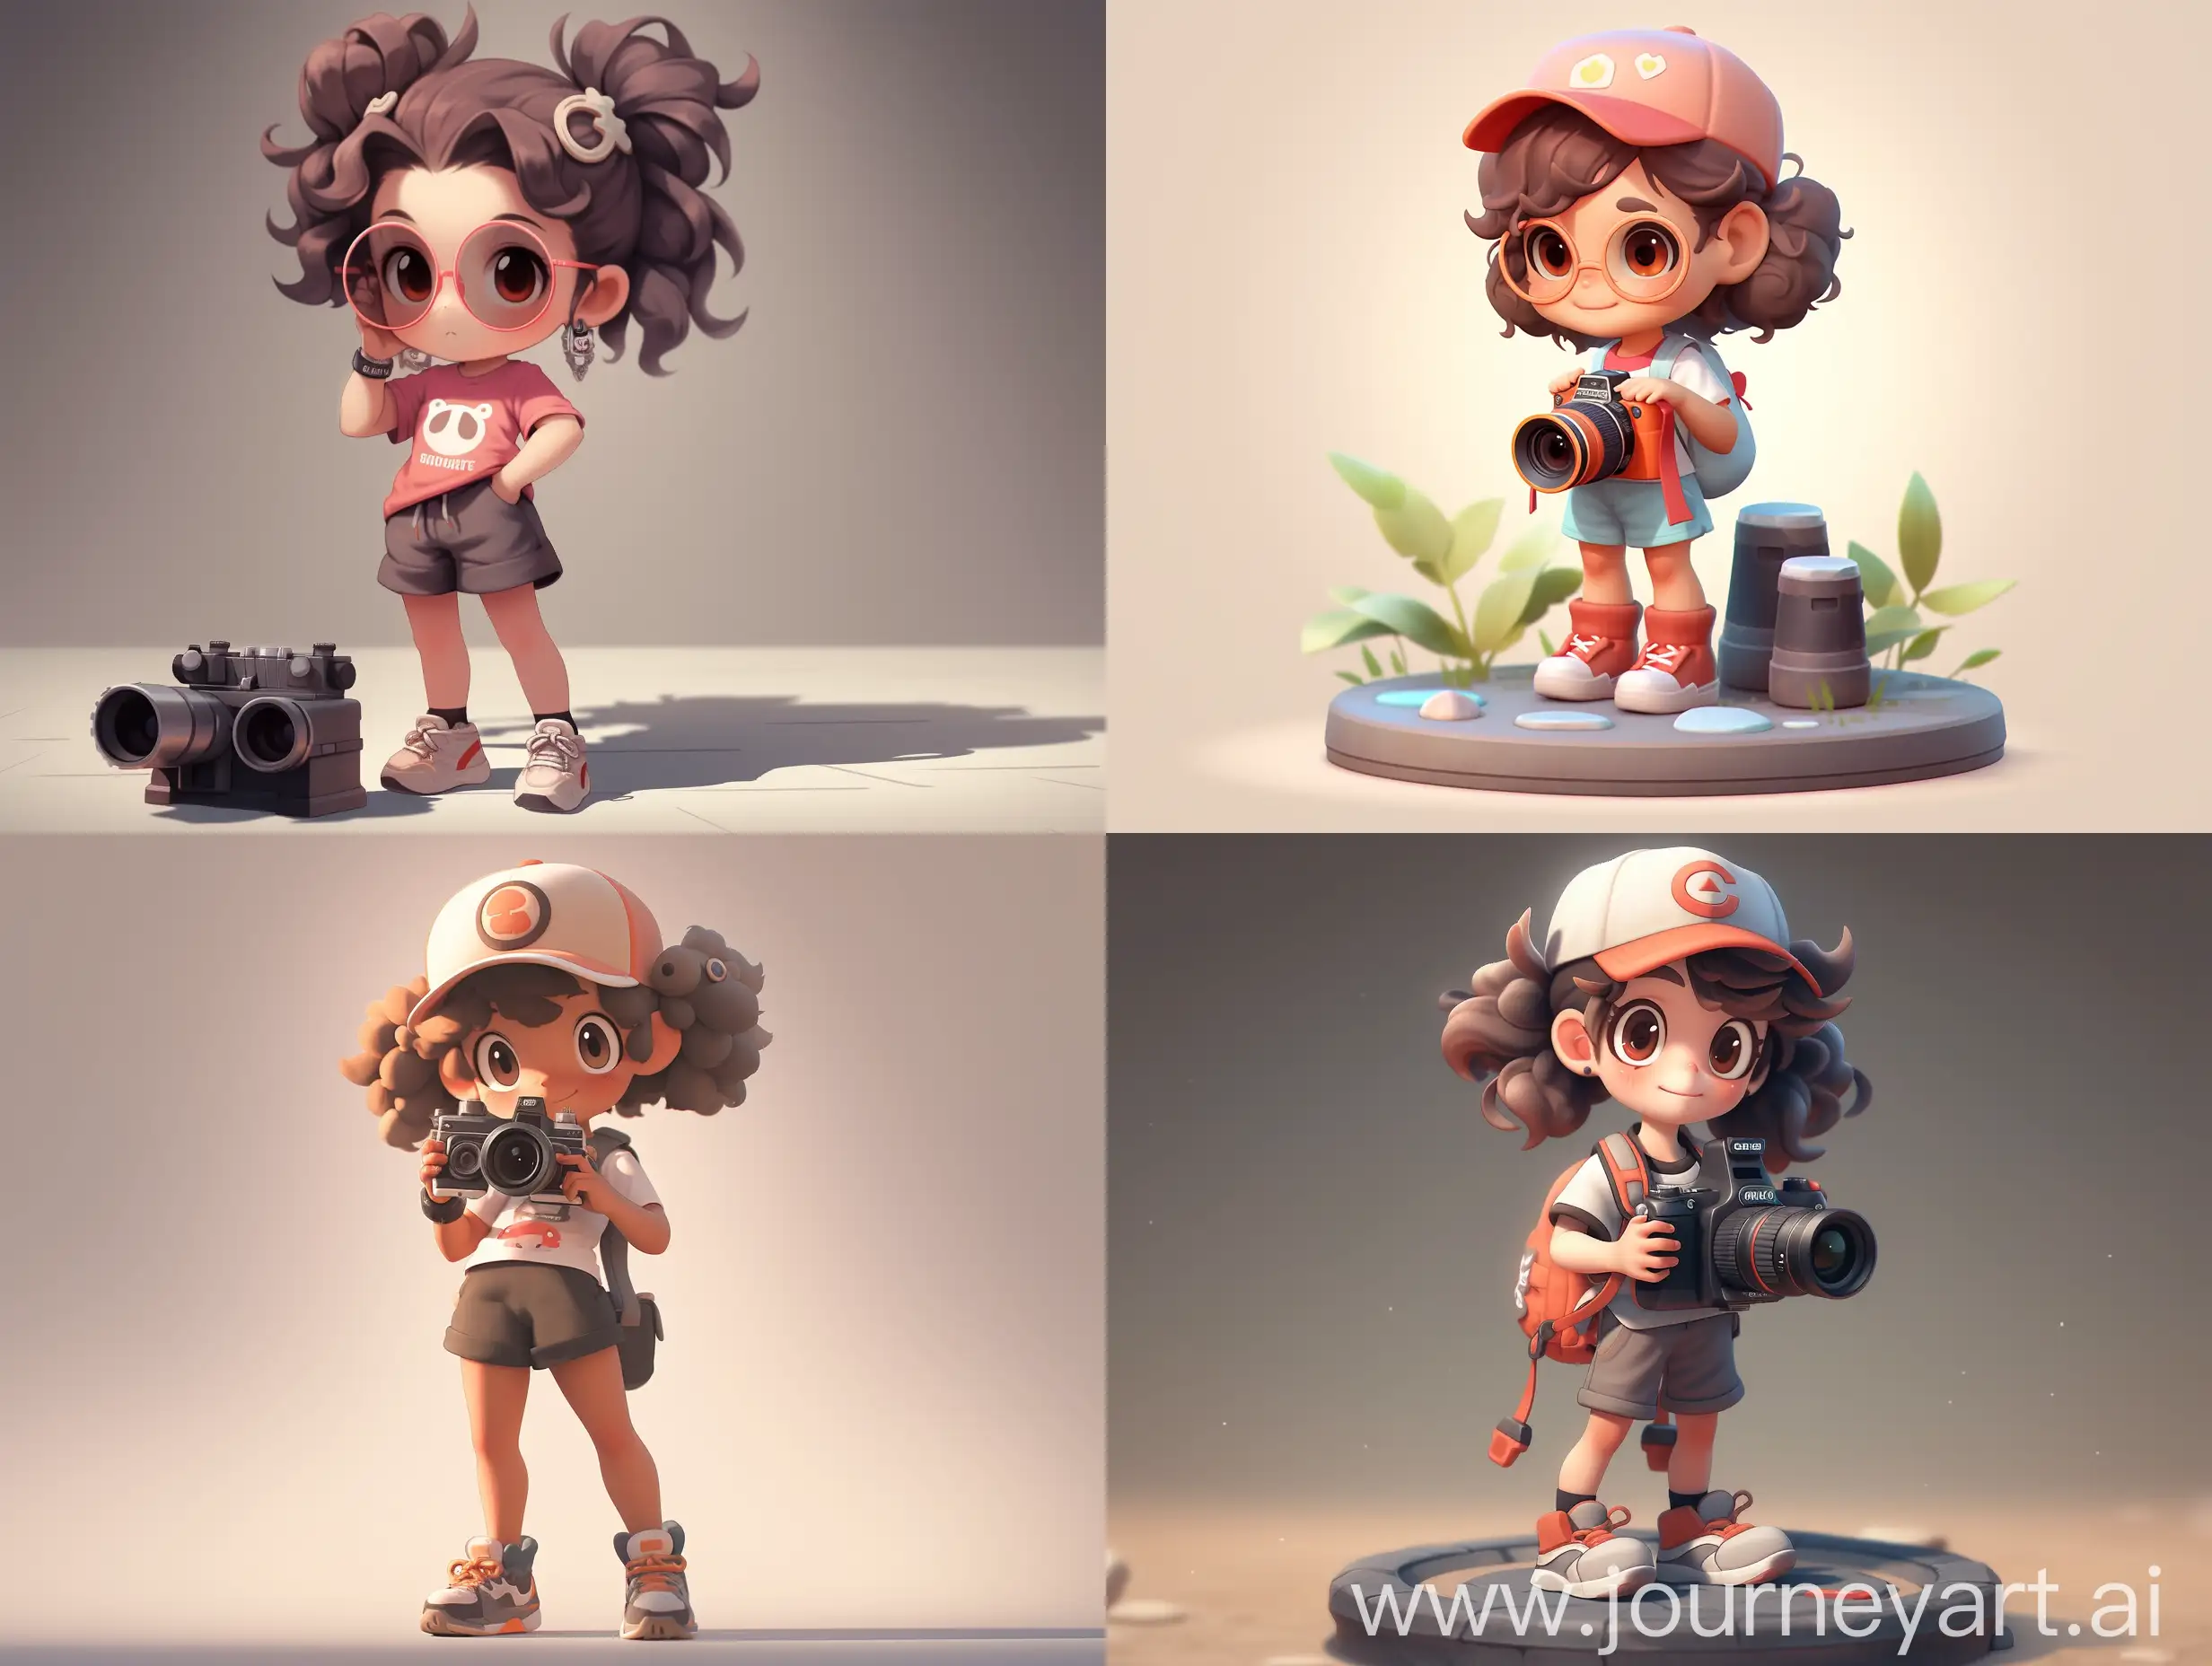 3d model,A 8 years old cute girl,wearing “sunglasses”,with very very very very very very very very very very very very “short” curly hair,hold a camera on hand,,wearing a t shirt and shorts, with a peaked cap,full body portrait ,clean backgroung ,Mini figures,mockup blind box,toys,3D,oc render,chibi,cute,abs,disney ,front lighting ,full shot ,8K --s 750 --niji 5 --s 750 --niji 5